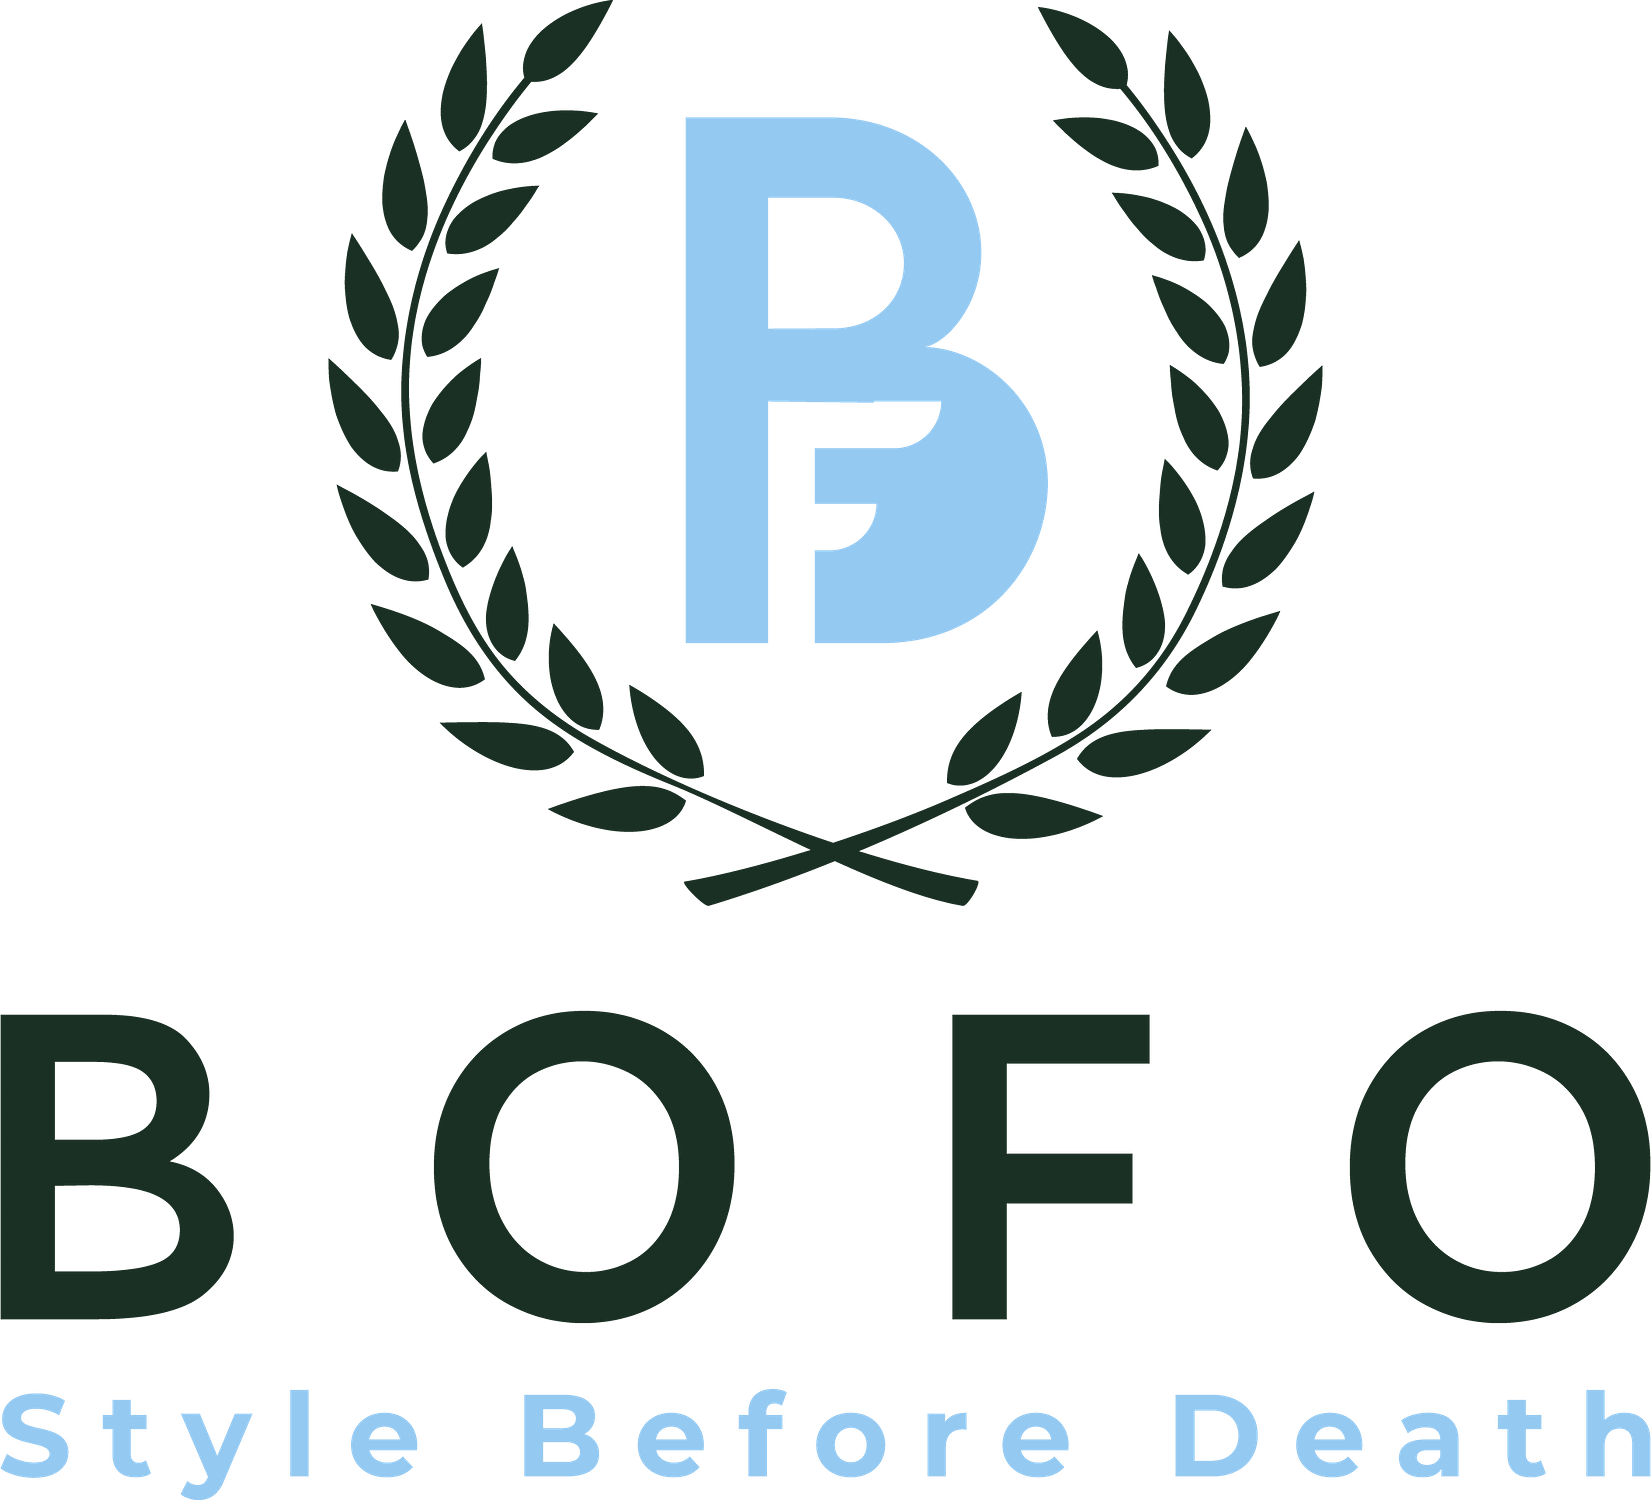 Logo with LArge BOFO written under a wreath with light blue emblem and slogun Style Before Death